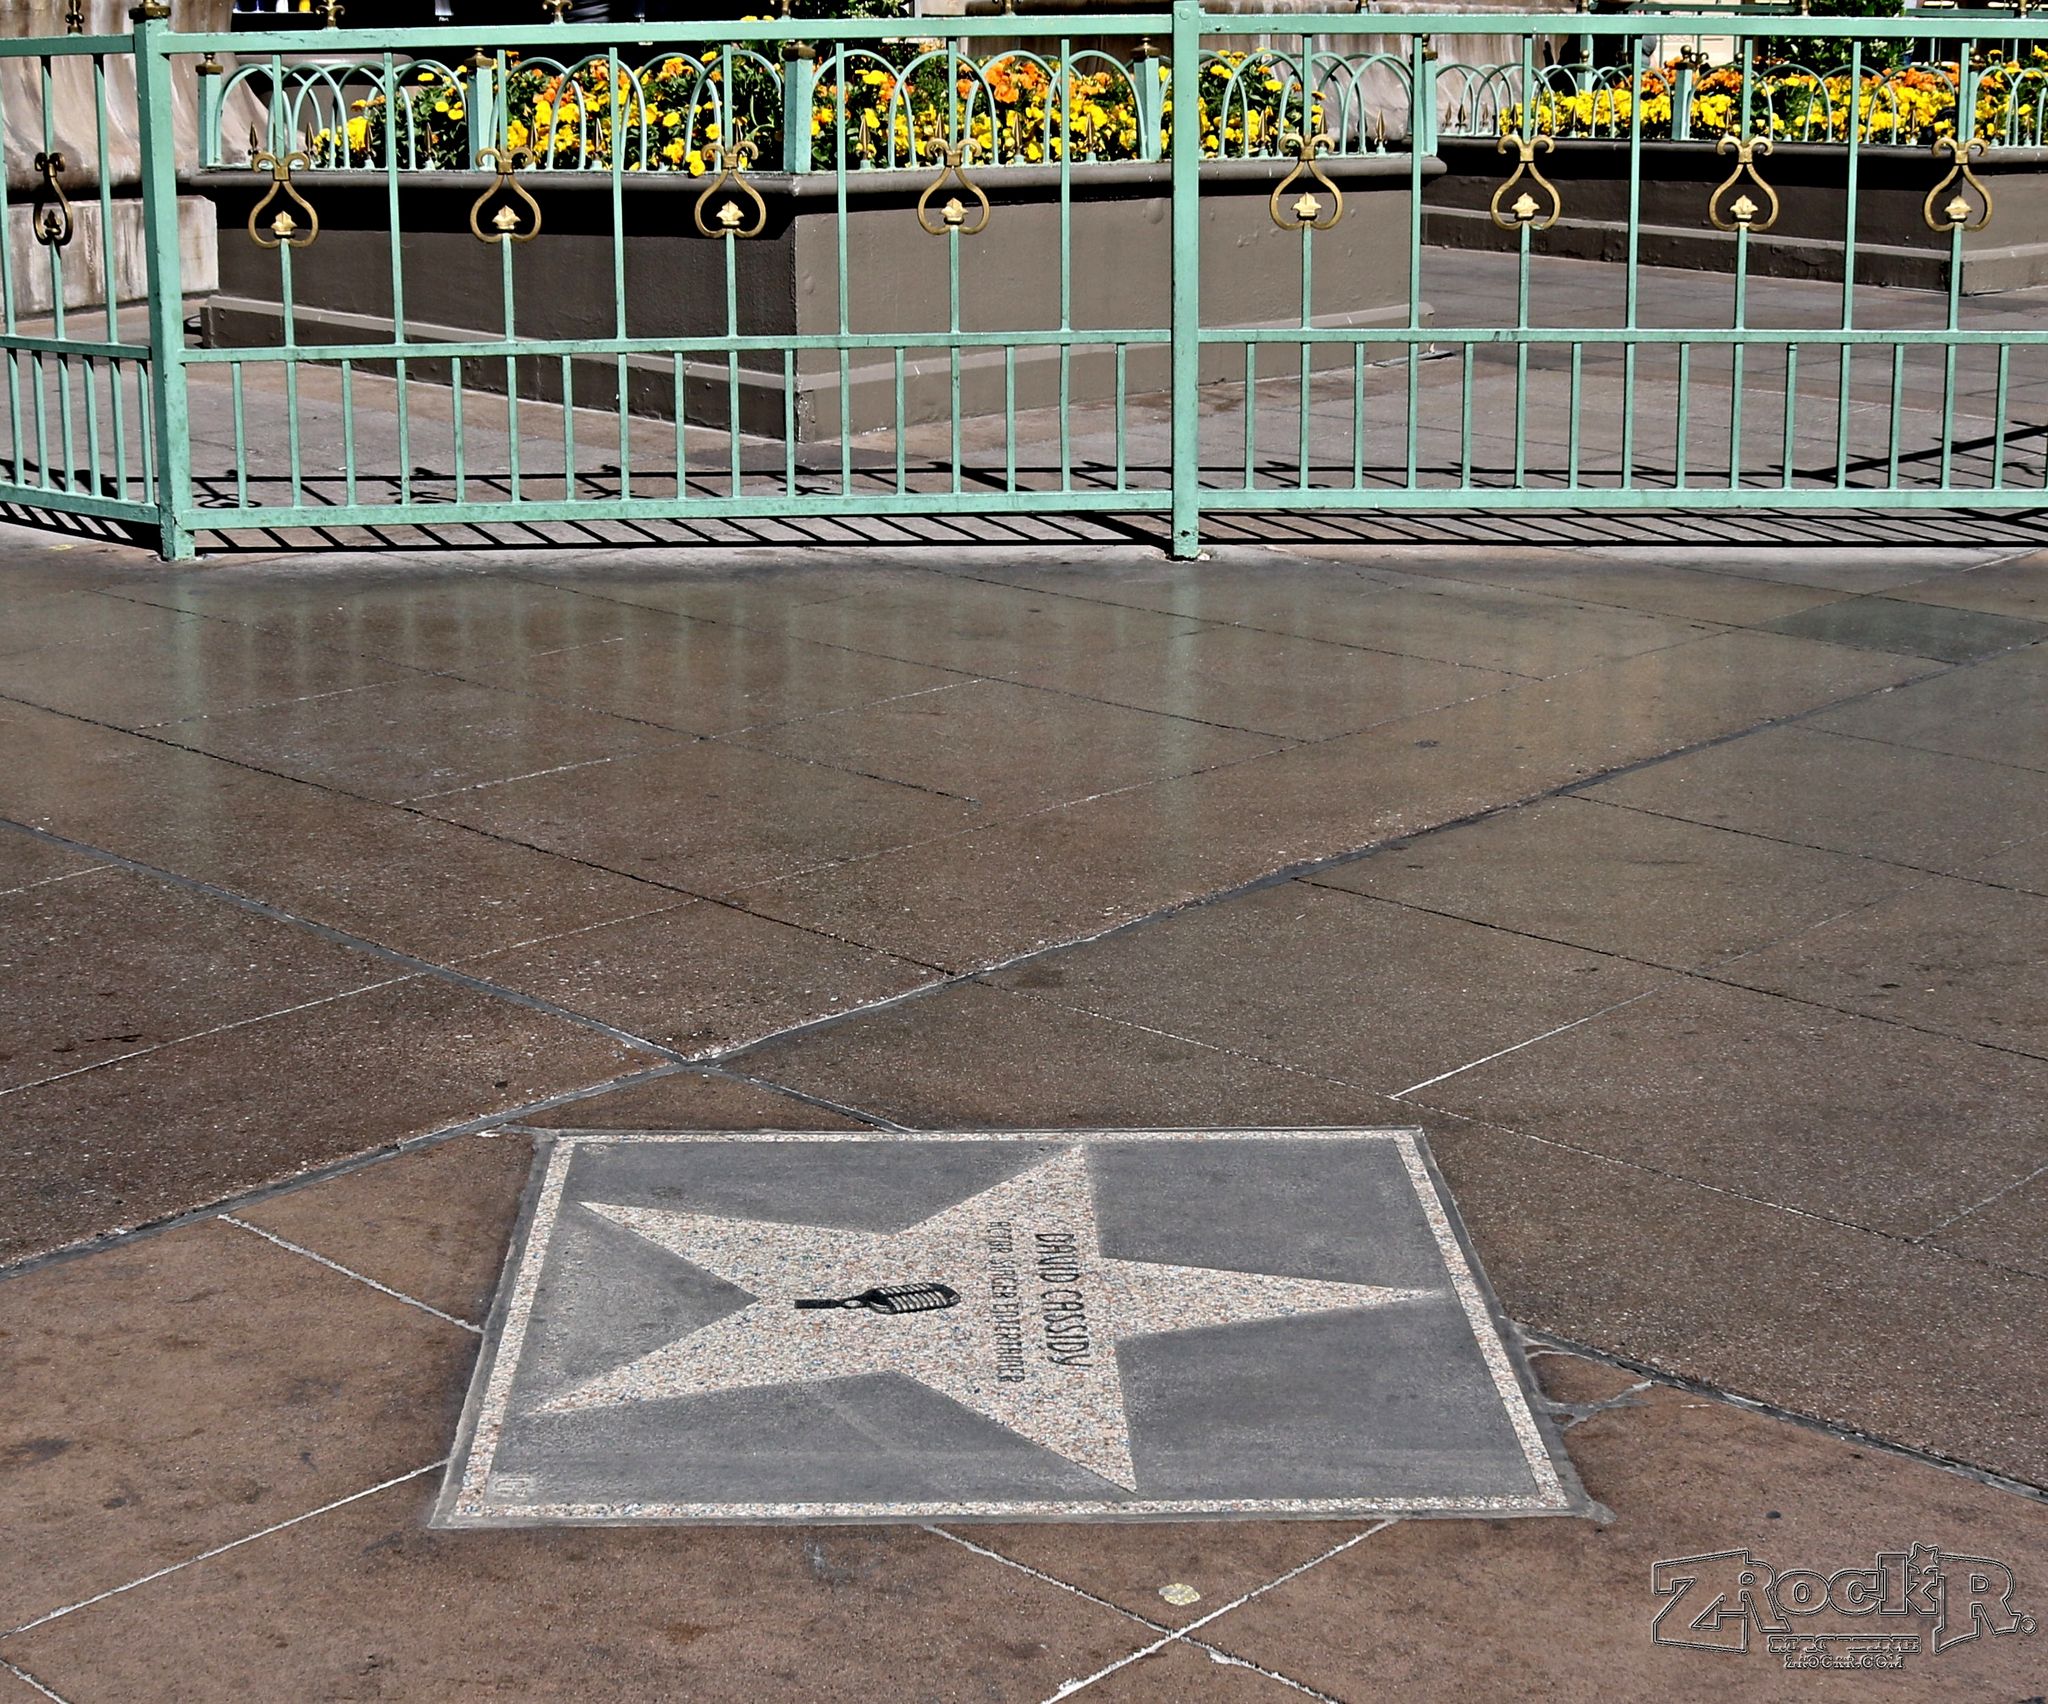 David Cassidy's star located in front of the Paris Hotel in Las Vegas 